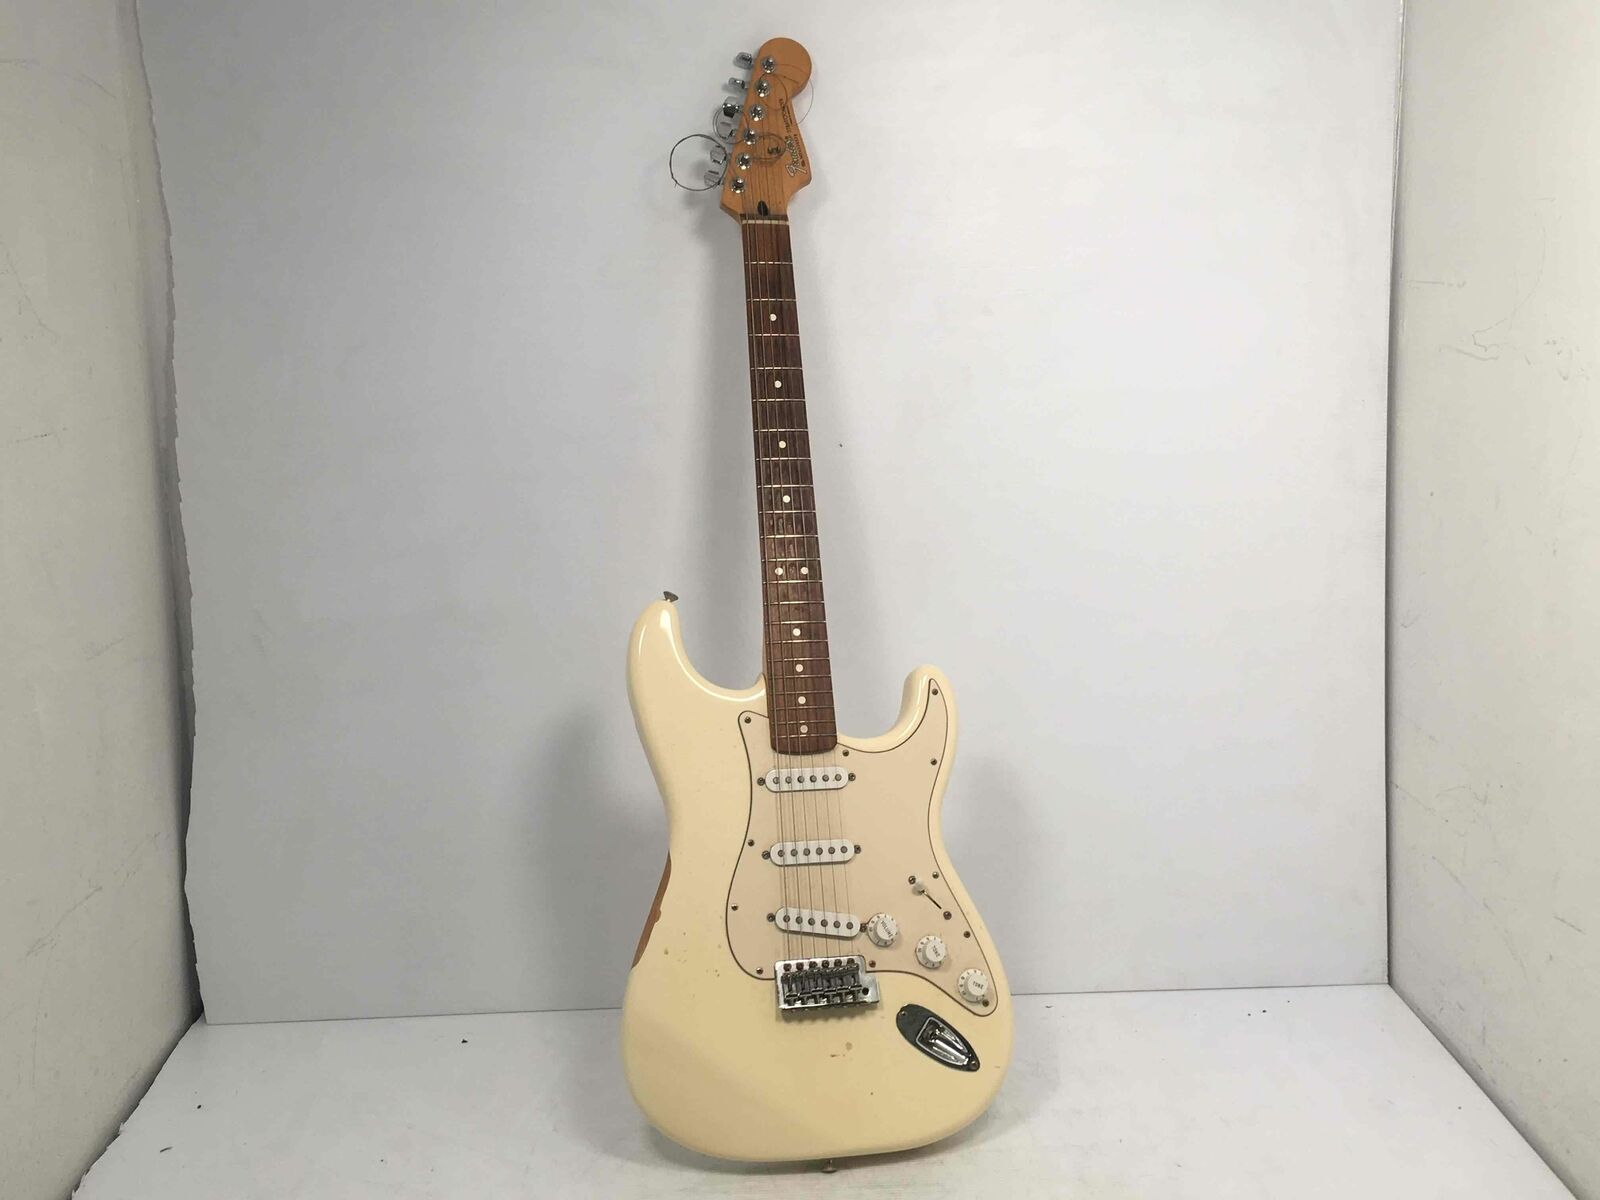 Fender Stratocaster Electric Guitar Egg White w/ faded signatures coating damage